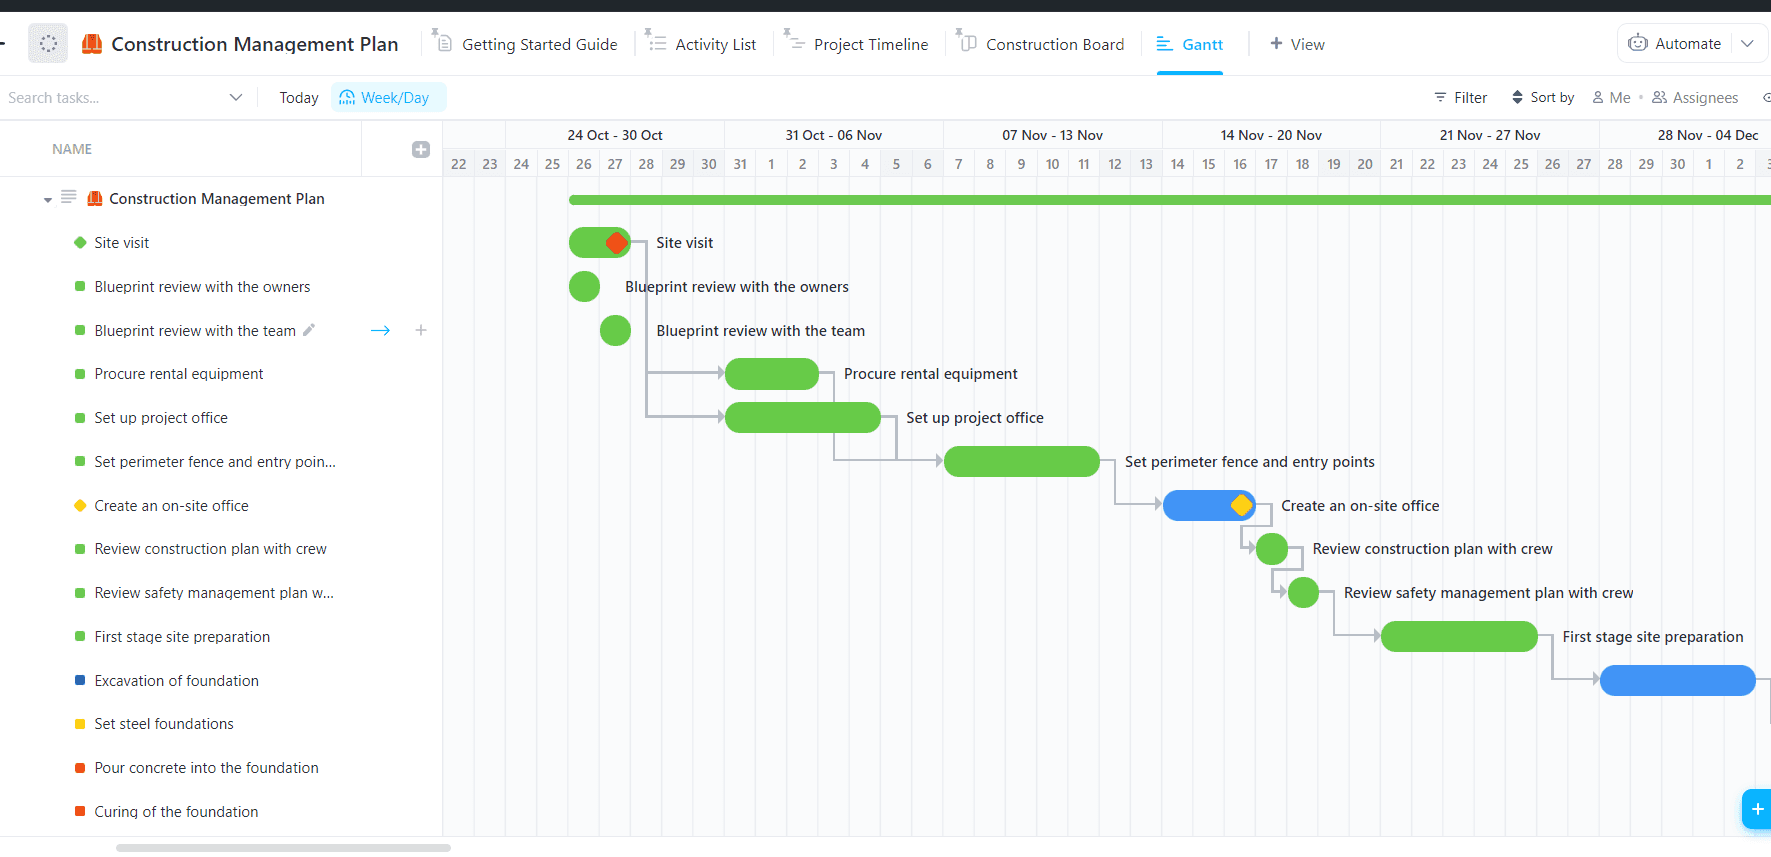 The ClickUp Construction Management Plan lets you create and manage your construction schedule throughout the build. The easy-to-follow visuals let you visually organize the milestones, tasks, and time frames of your project. It also provides helpful comments to help you understand how each step is progressing.